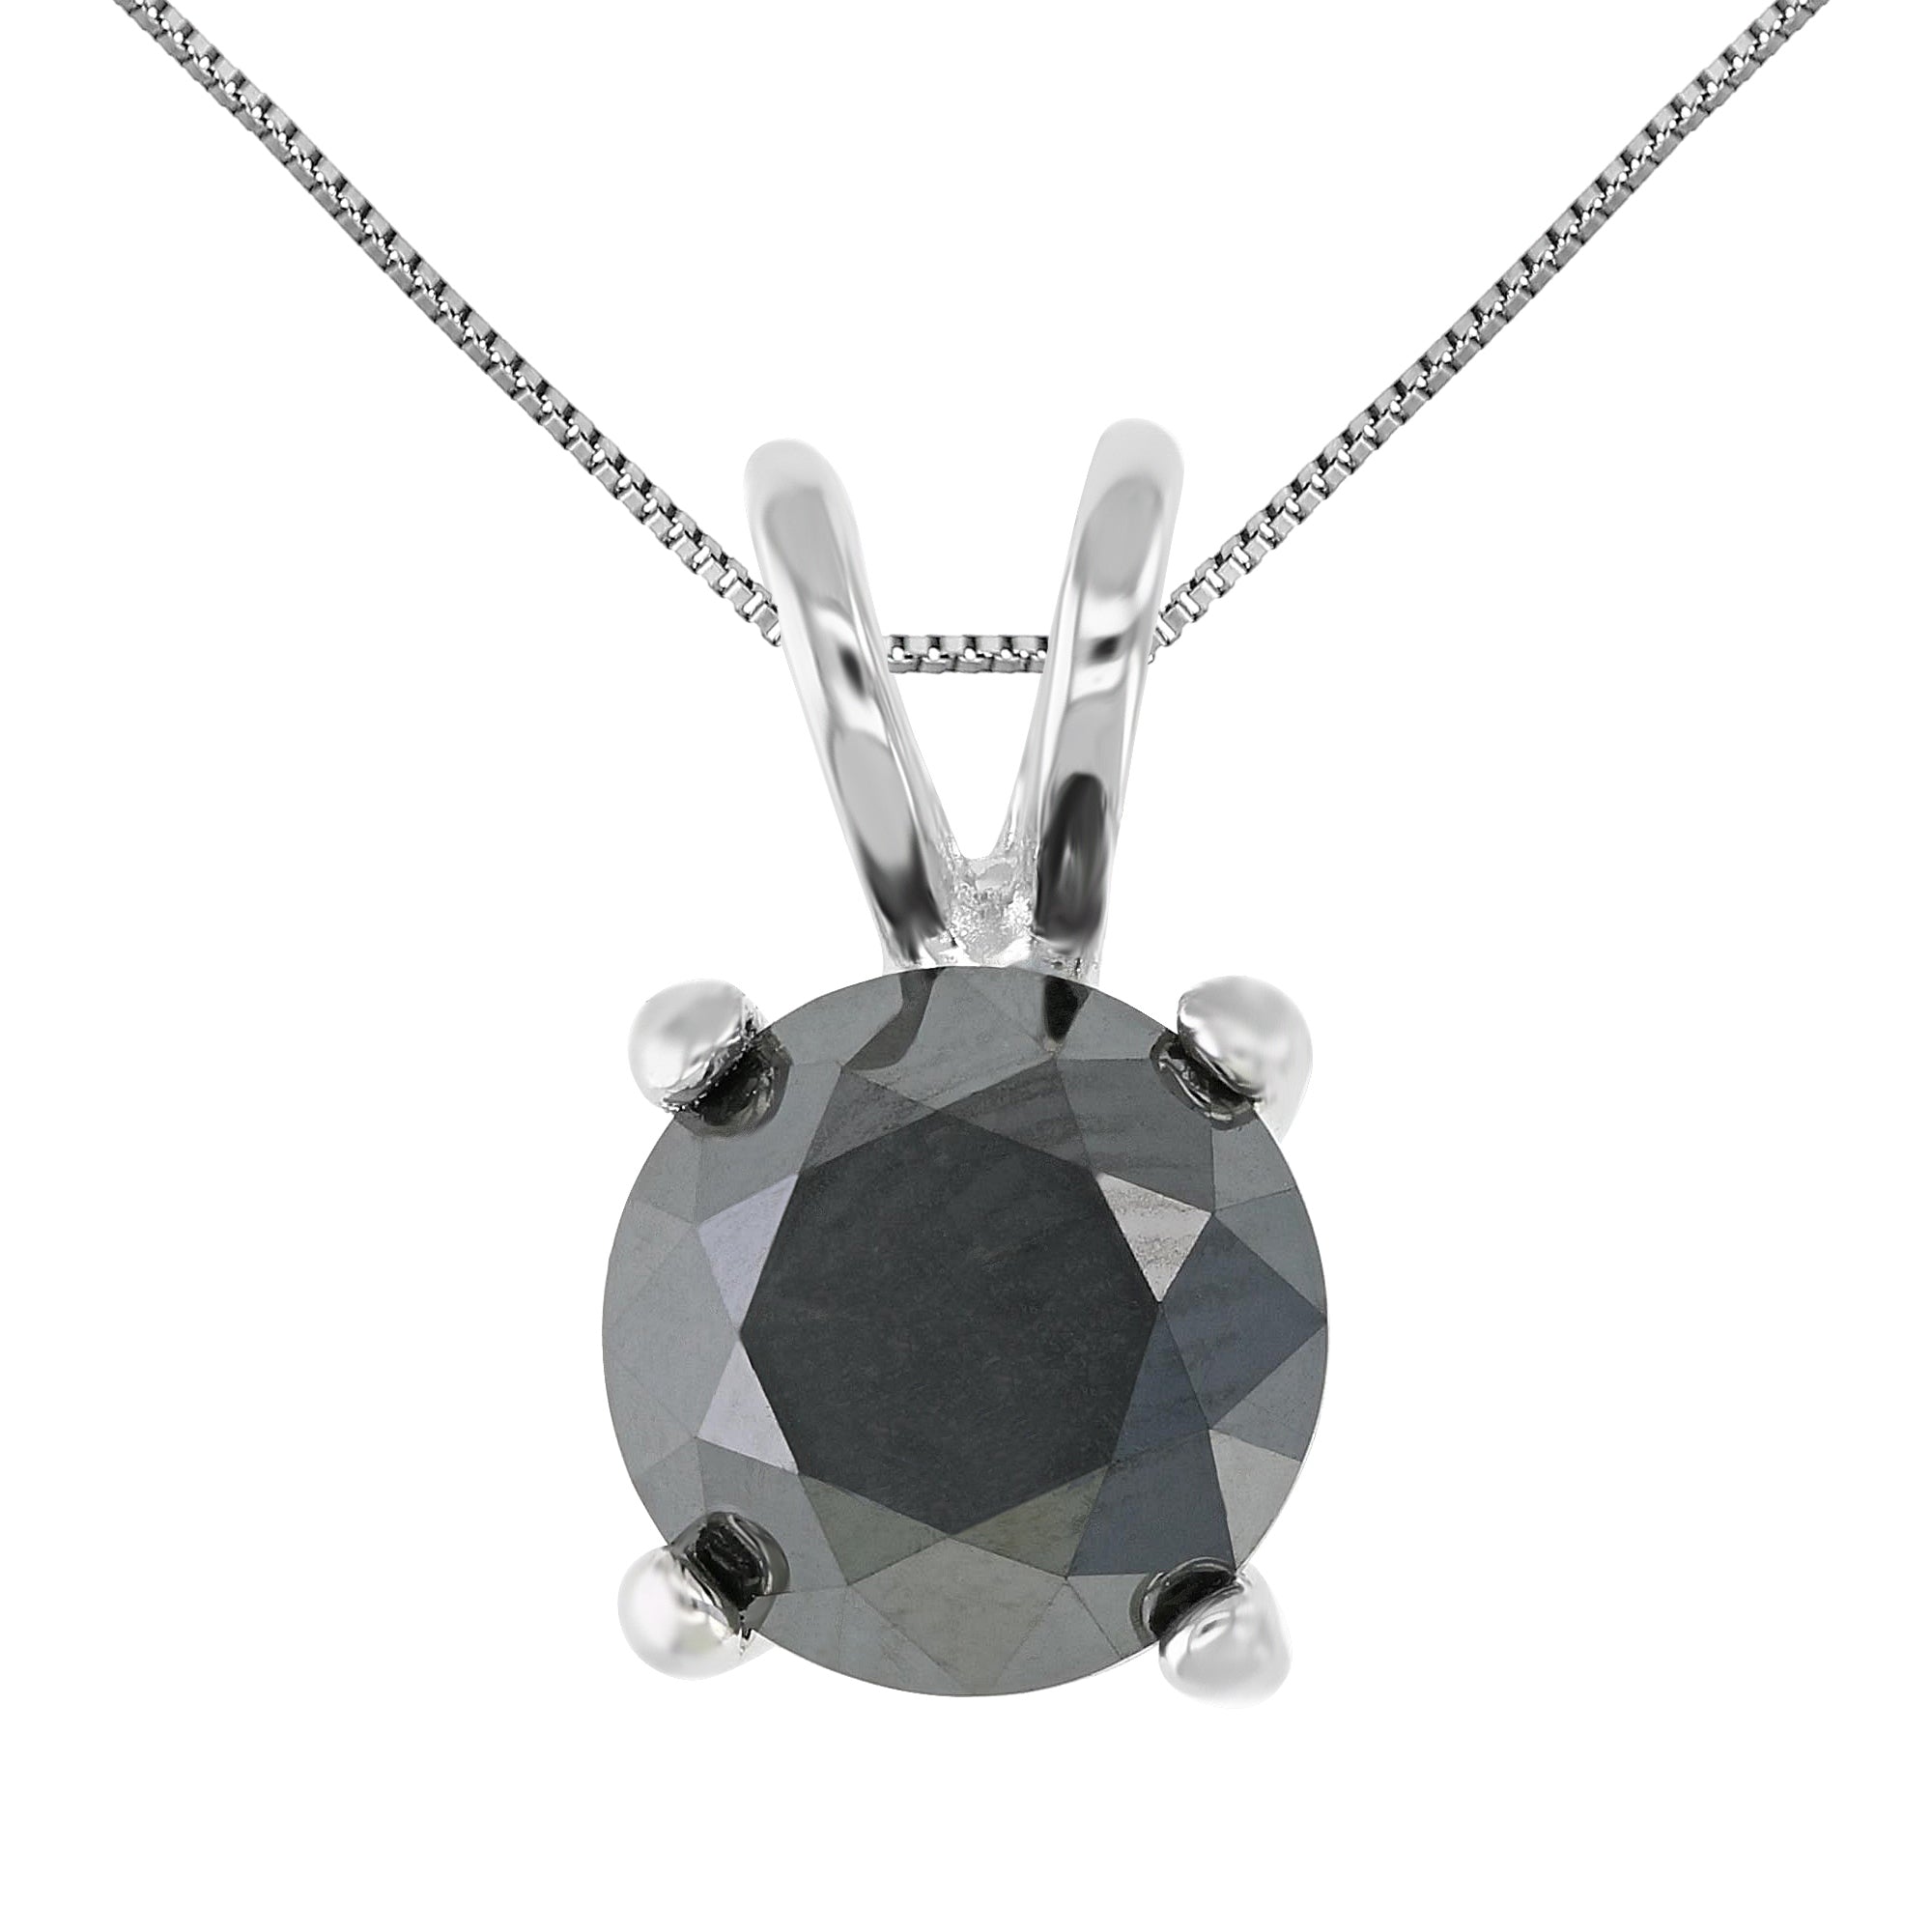 3.50 cttw Diamond Pendant, Black Diamond Solitaire Pendant Necklace for Women in .925 Sterling Silver with Rhodium, 18 Inch Chain, Prong Setting